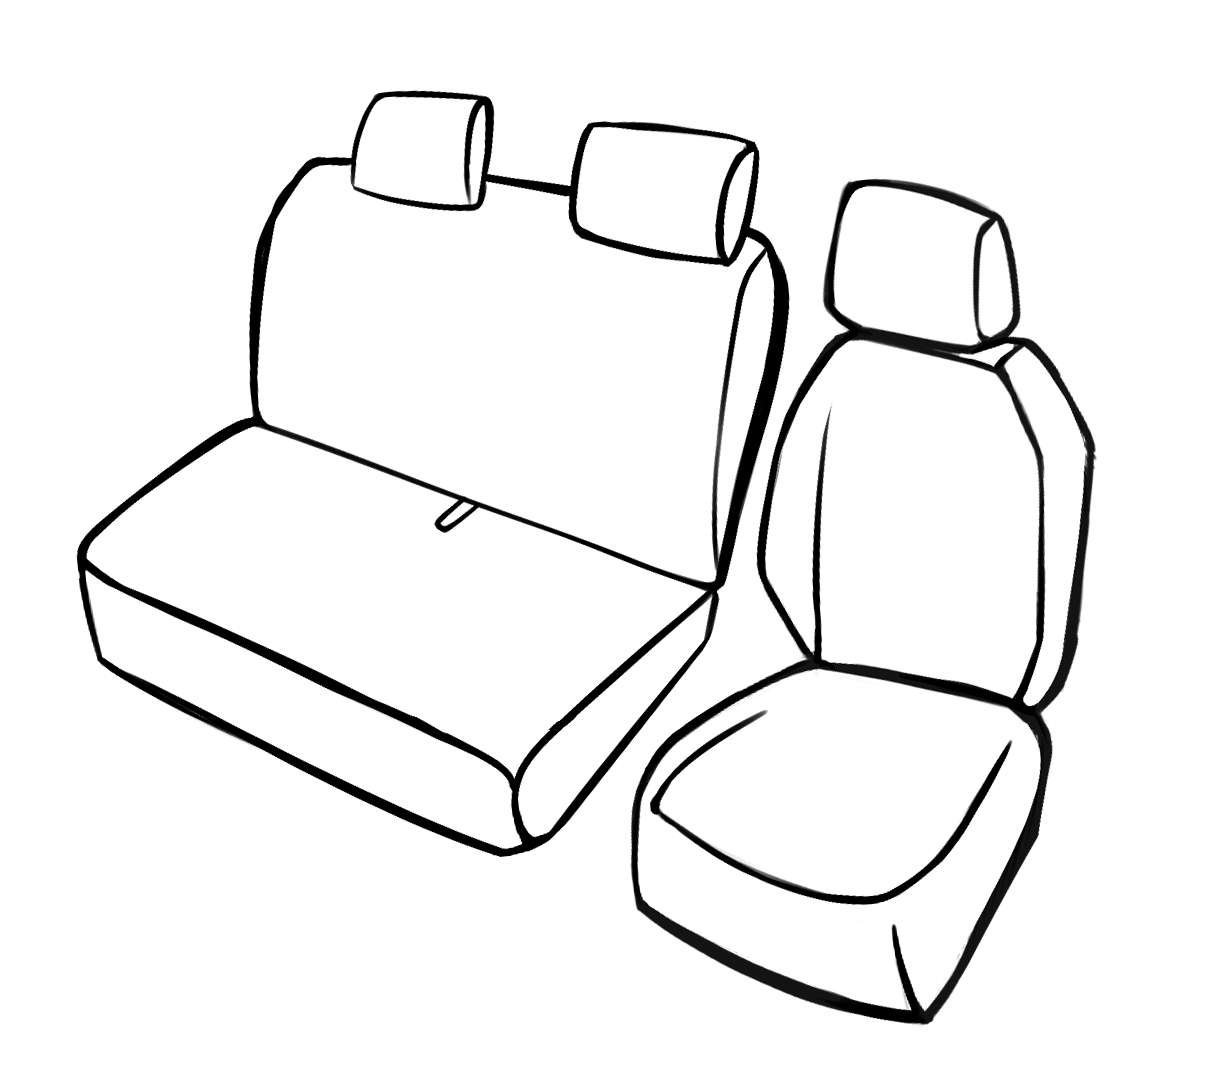 Seat cover made of fabric for Mercedes Vito/Viano, single seat cover, double bench seat cover